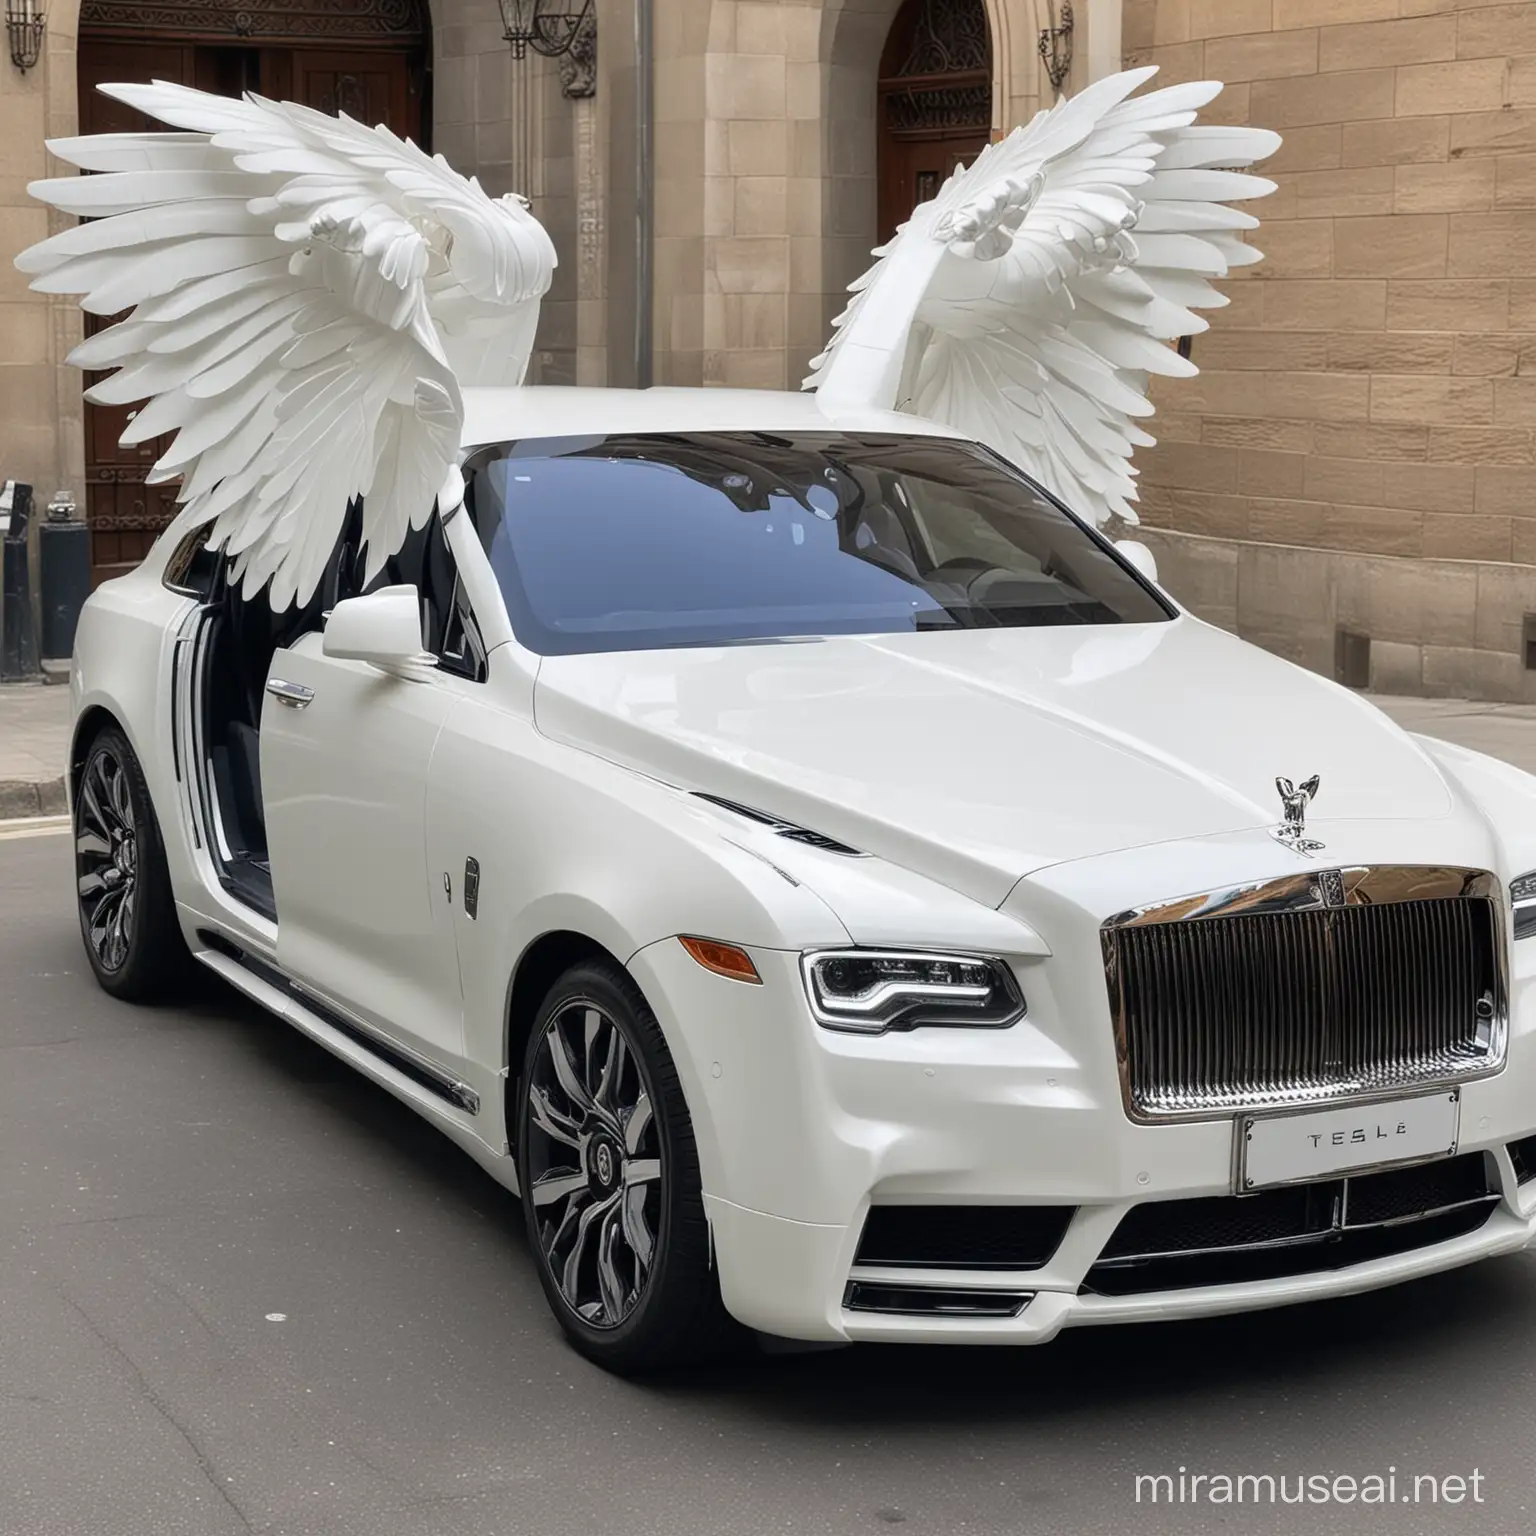 Can car which is sedan and add rolls Royce front bount in it and also add Tesla model x like door which open like butterfly. Make car In white colour 